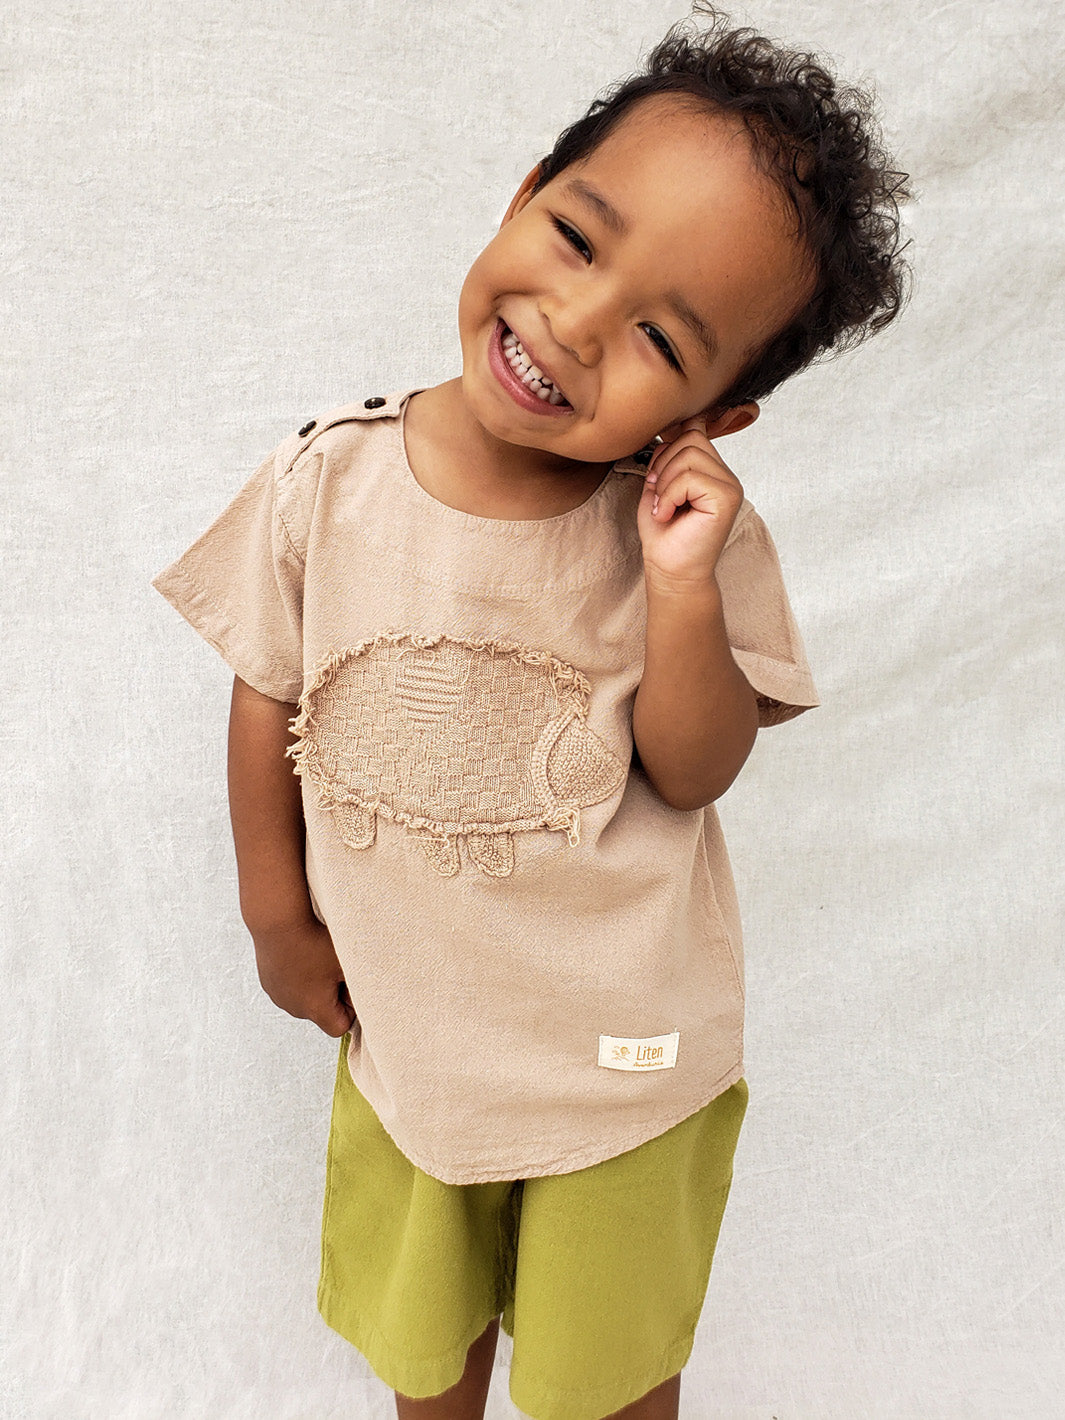 Liten Aventuris Natural Tocuyo Cotton t-shirt for kids. Kirpi is a cute little porcupine embroidered in knitted natural tanguis cotton. Our skilled artisans handcrafted Kirpi with care and attention to detail. Our lovely Kirpi T-shirt is a loose-fitting garment with coconut buttons. The opening on the shoulders makes the kid more comfortable when dressing up. Ethically made in Peru. Bomullskläder, barnkläder, Pojken & flickan tröja, Natural kläder, ekologisk kläder. Skjortor.